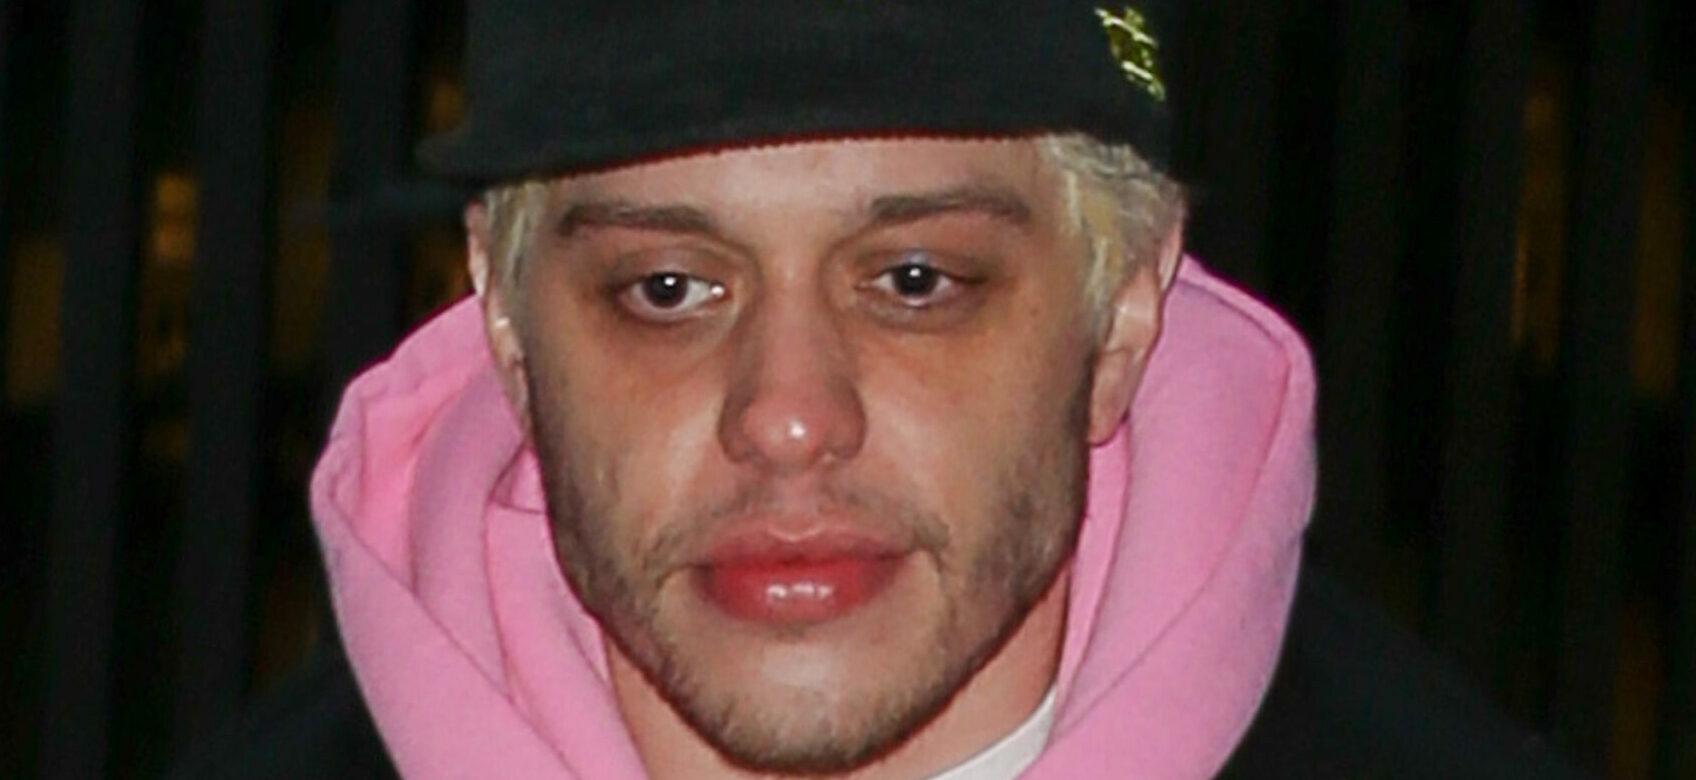 Pete Davidson Just Might Host The Oscars This Year